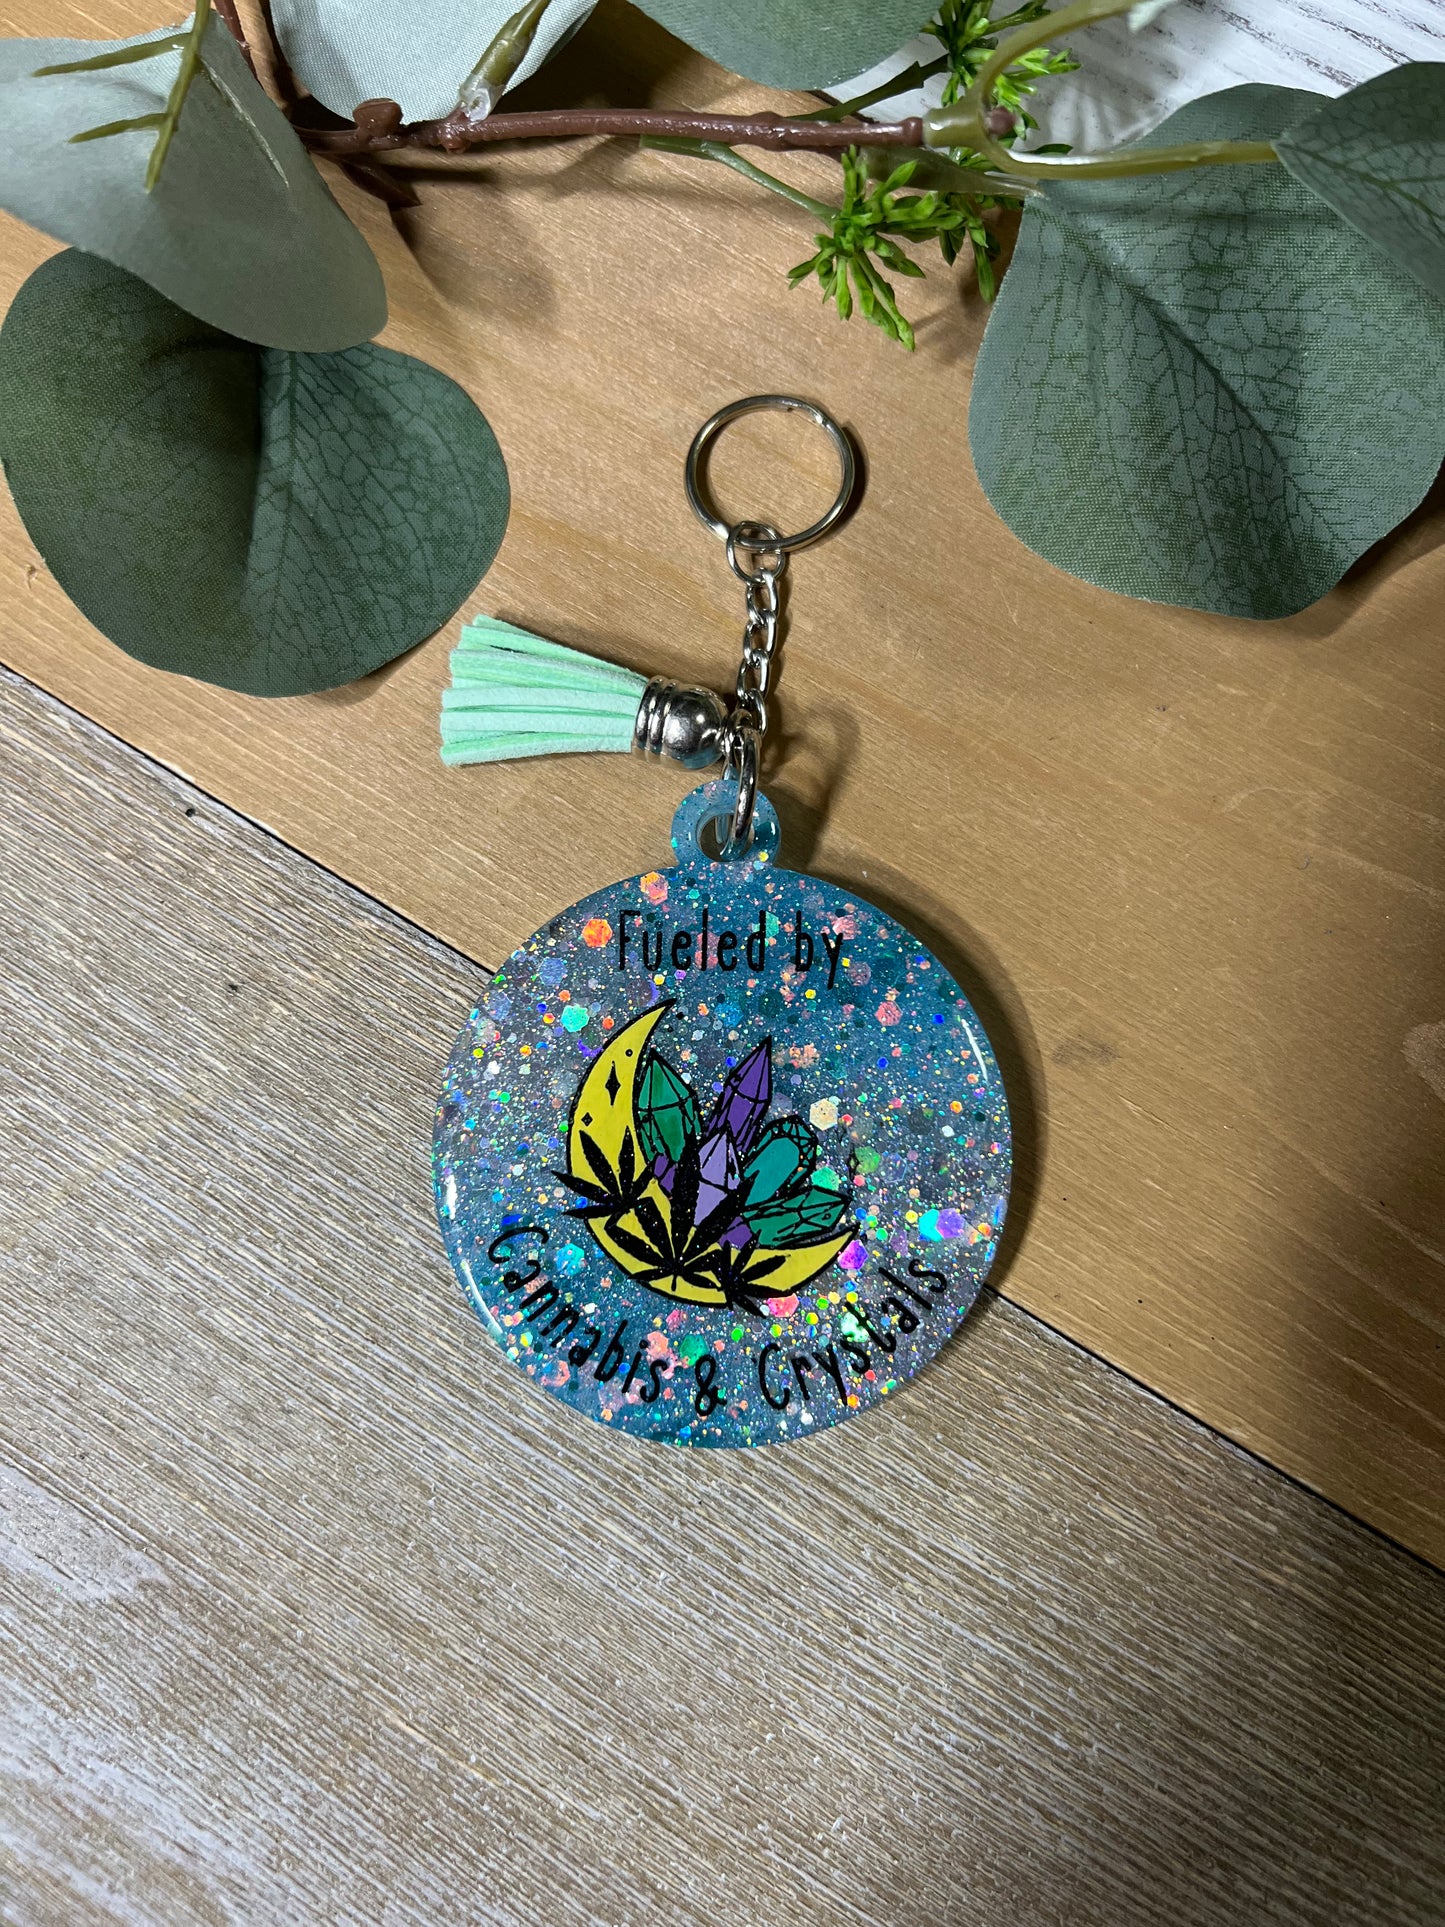 Fueled by Cannabis & Crystals Keychain